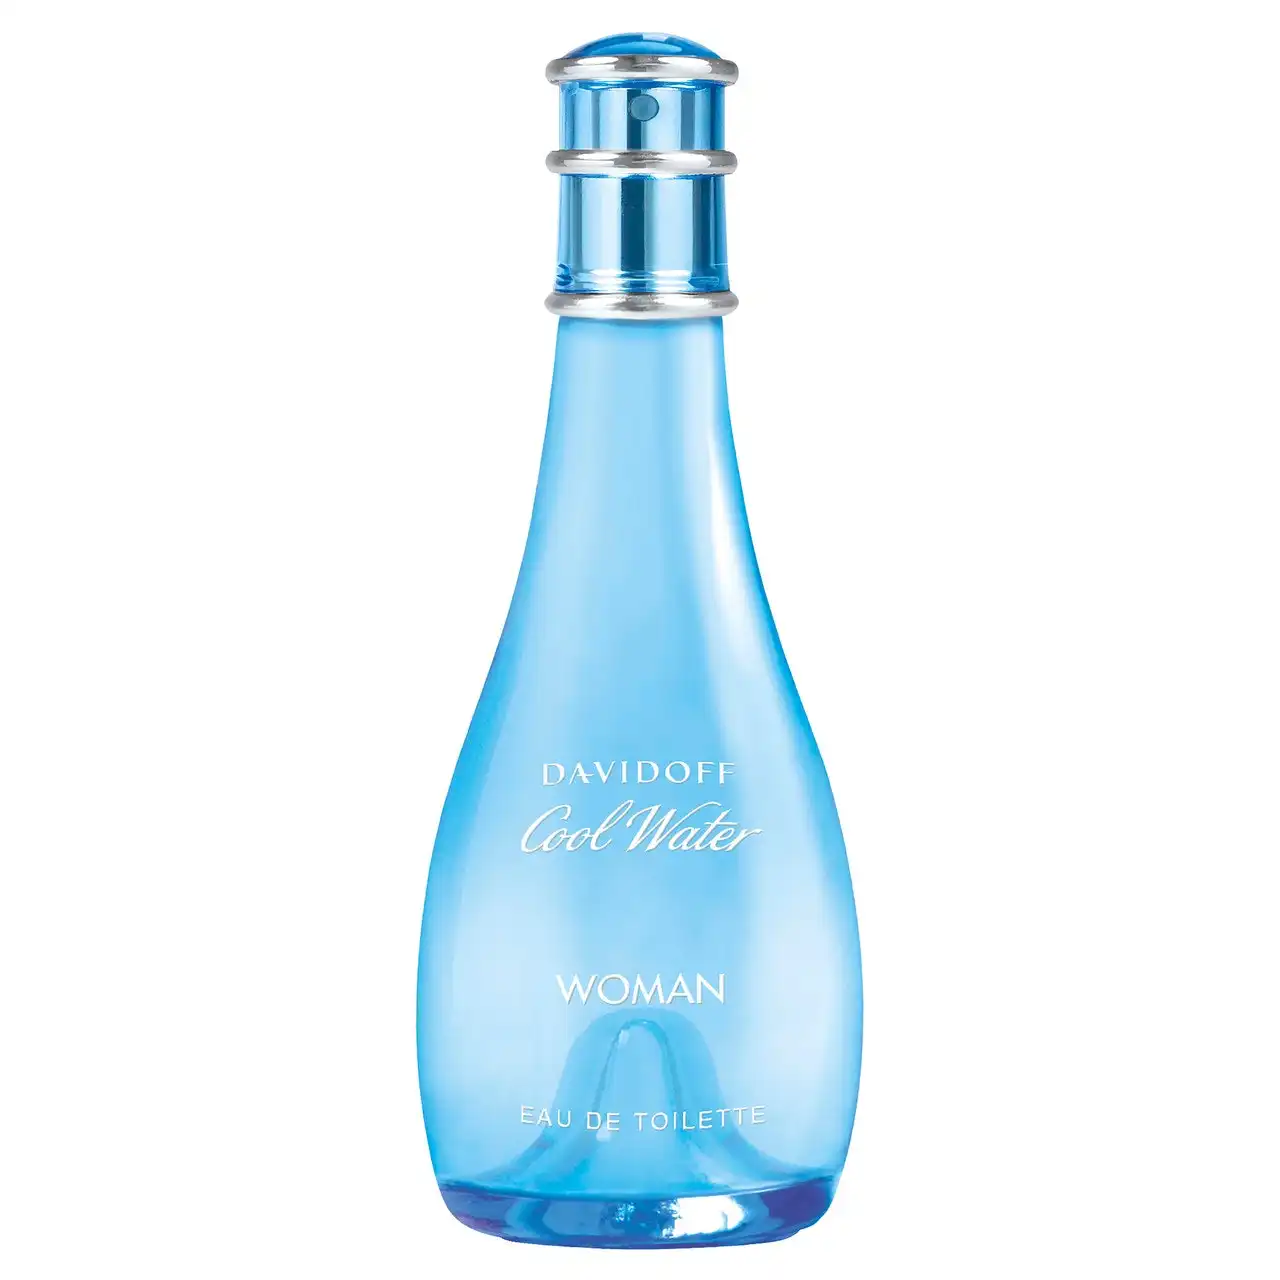 Coolwater 100ml EDT By Davidoff (Womens)